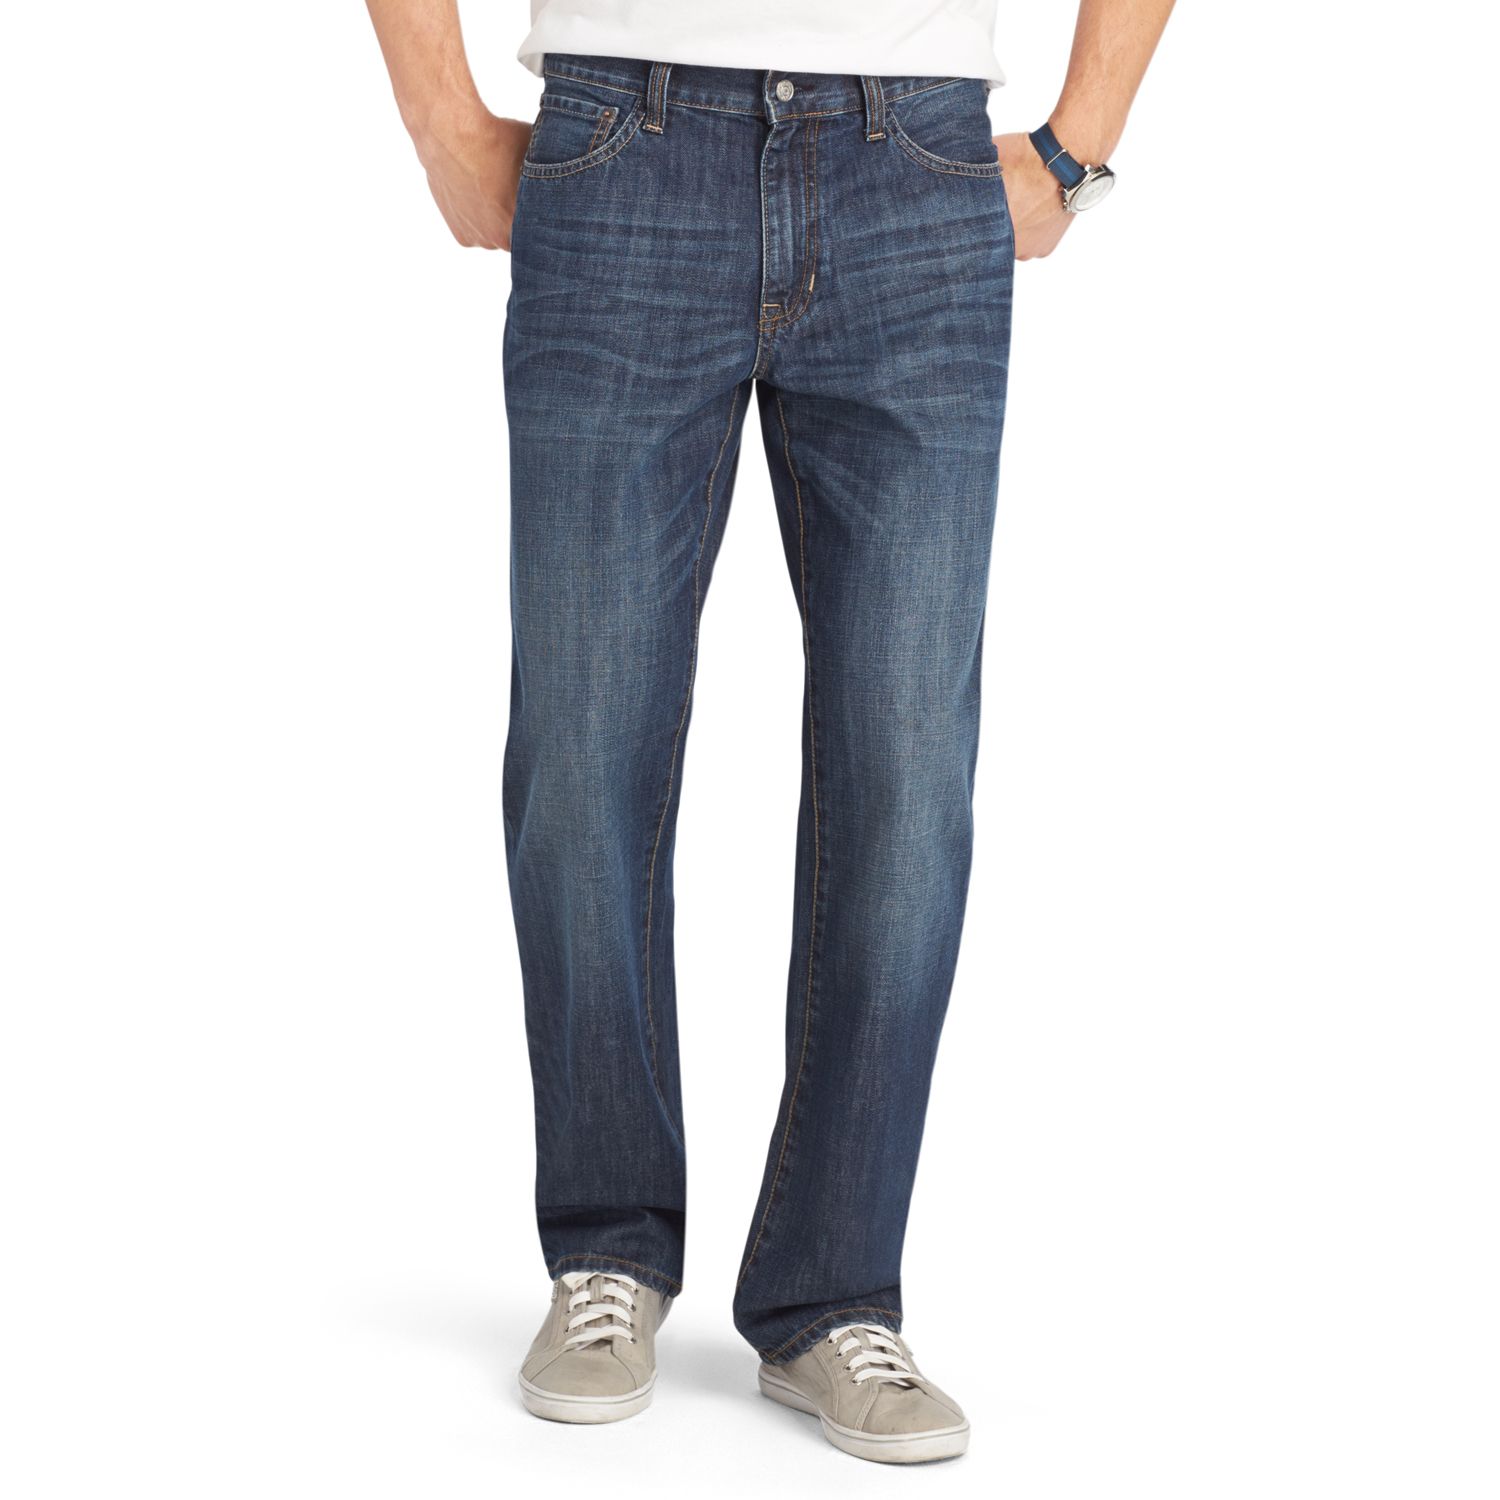 711 utility skinny ankle jeans